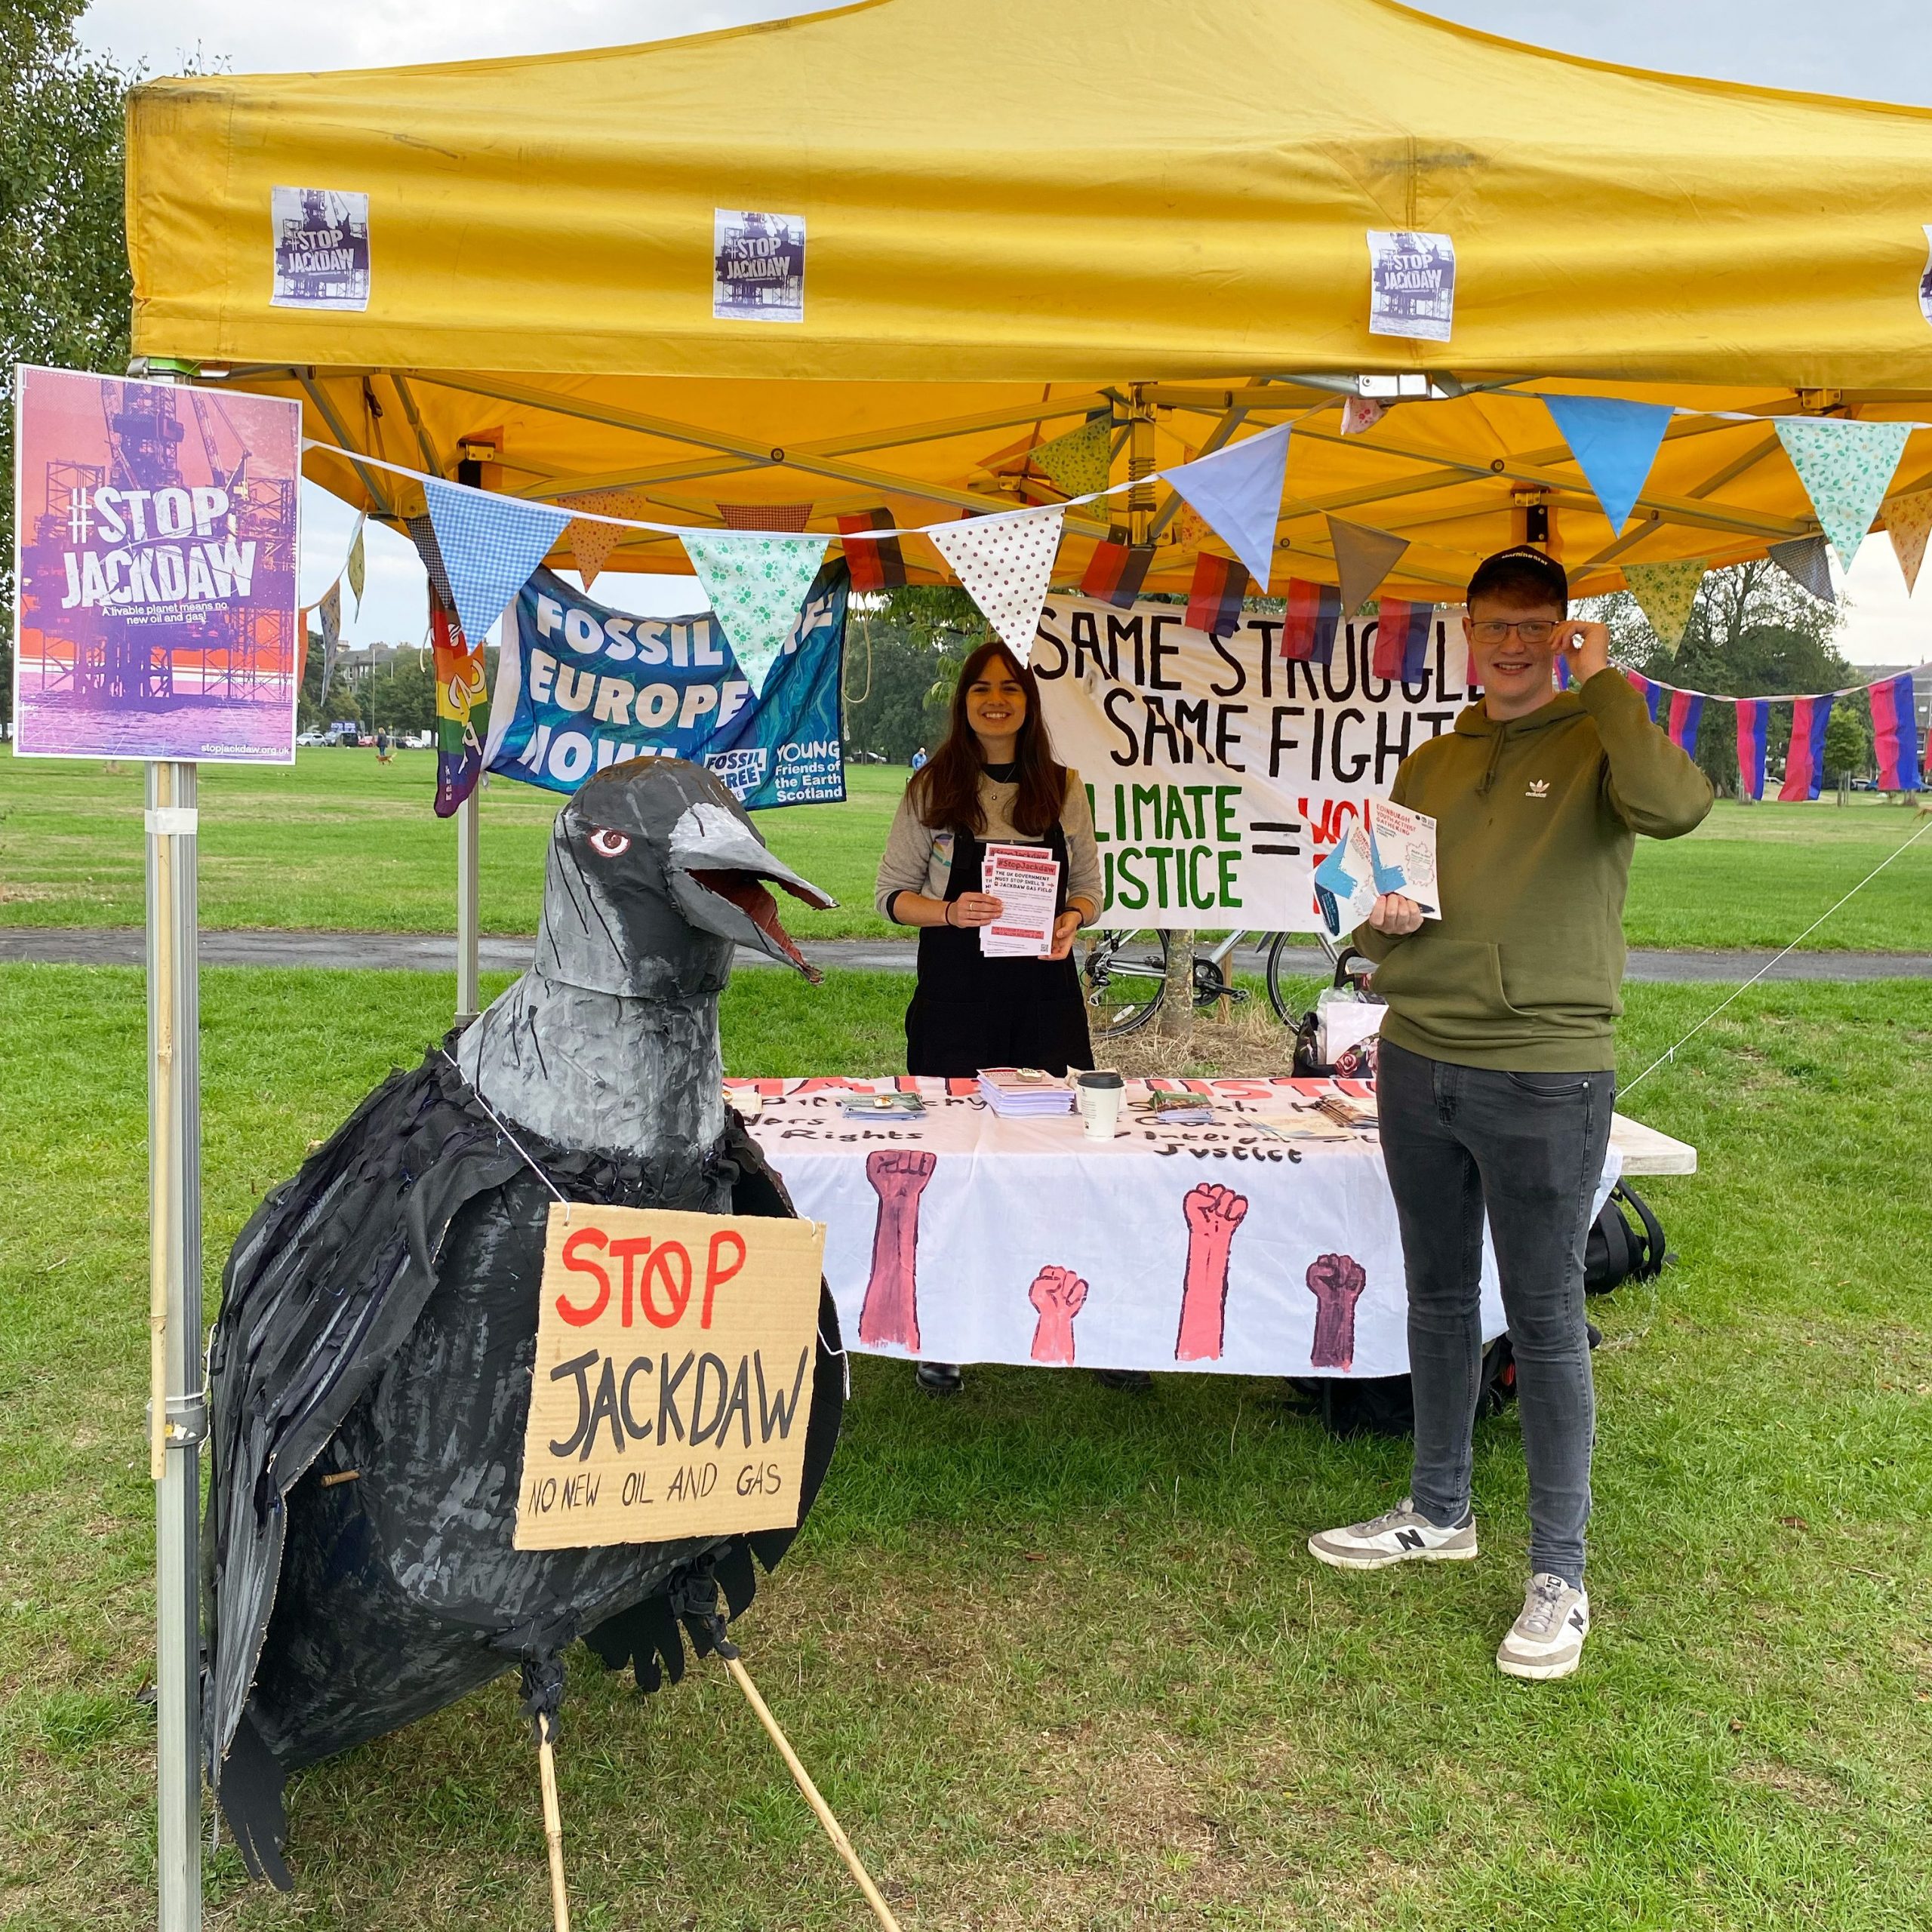 two people and a giant paper mache model of a jackdaw under a yellow gazebo with a table full of flyers and banners